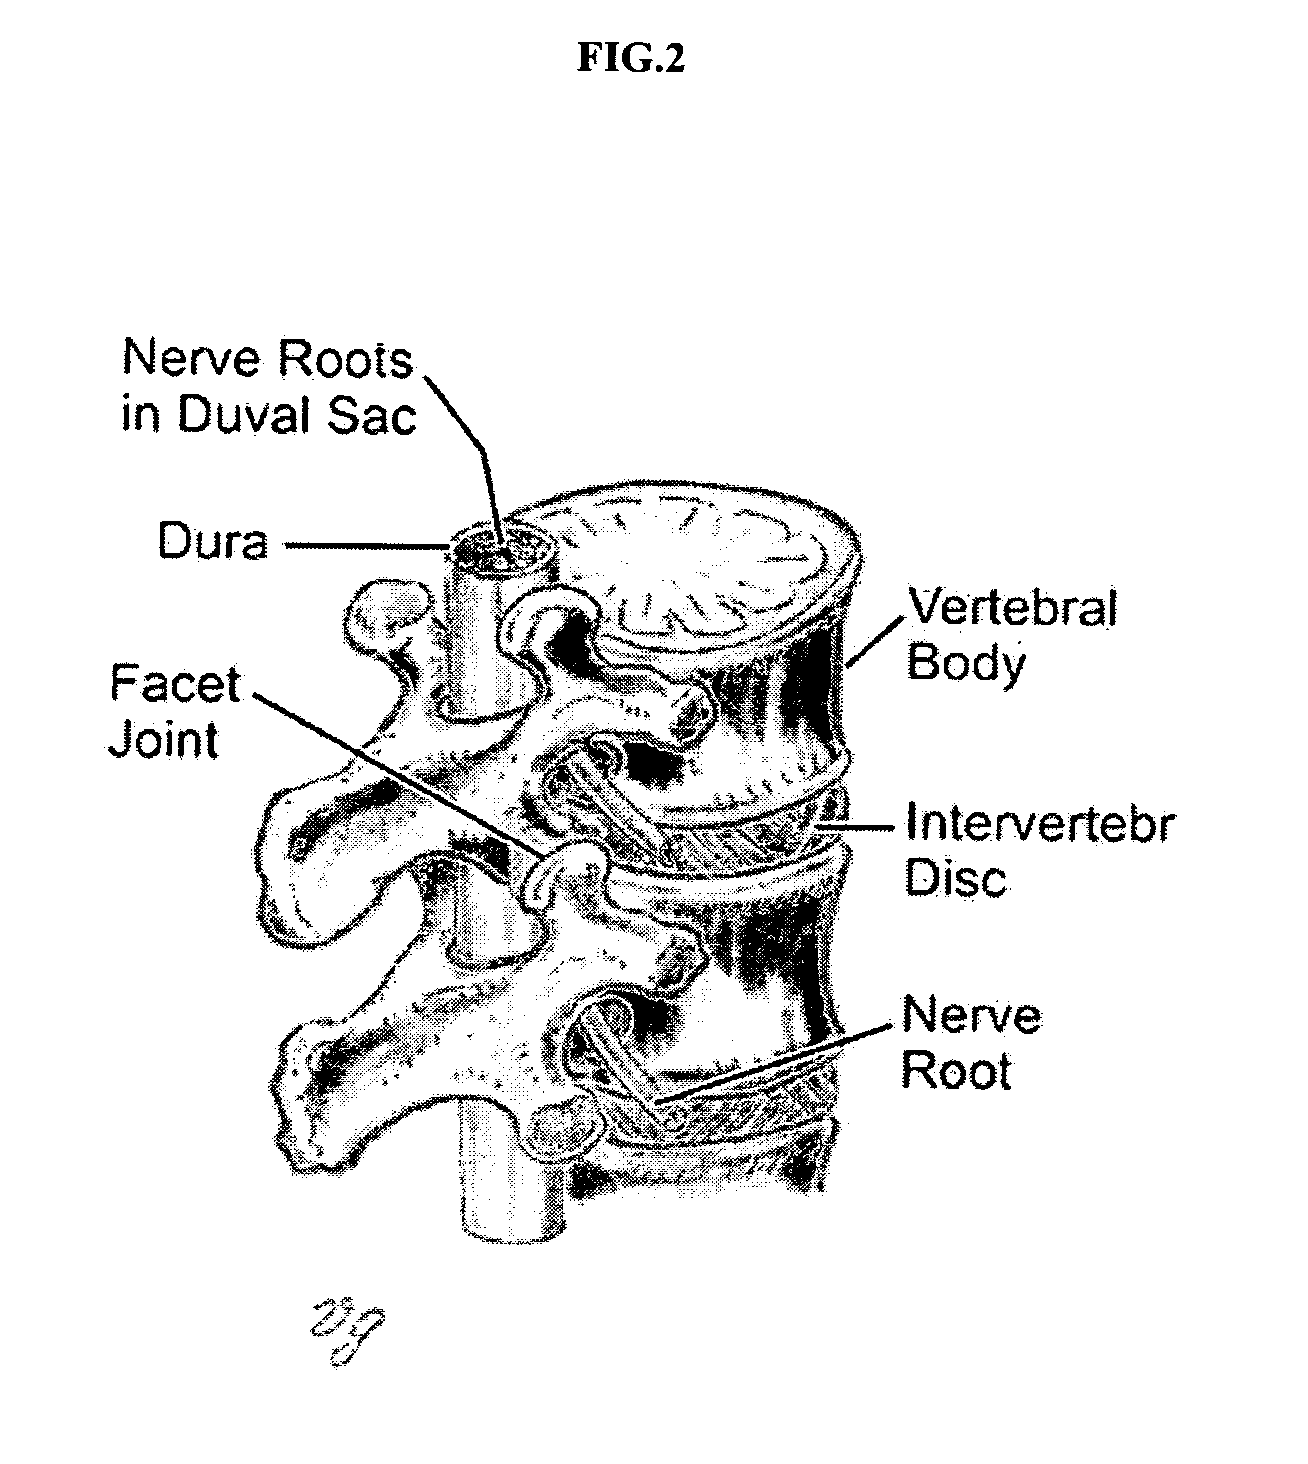 Methods of employing calcium phosphate cement compositions and osteoinductive proteins to effect vertebrae interbody fusion absent an interbody device